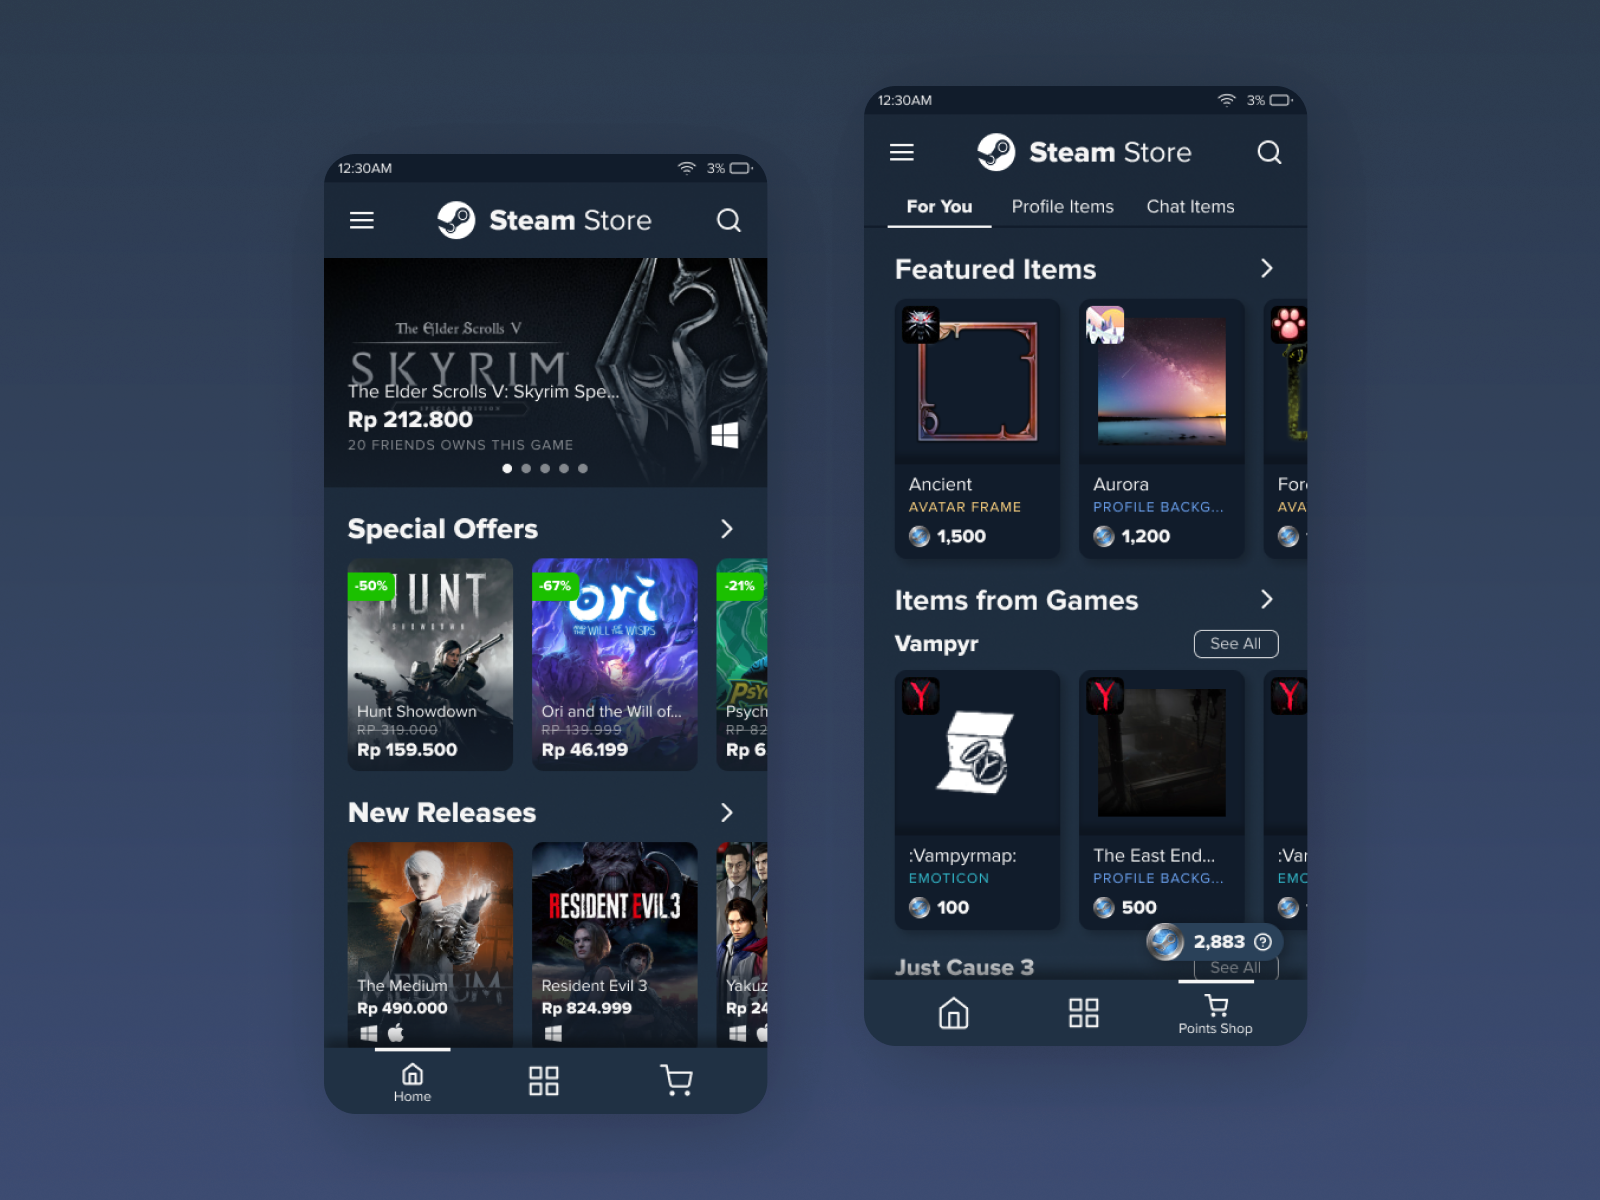 Steam Mobile na App Store